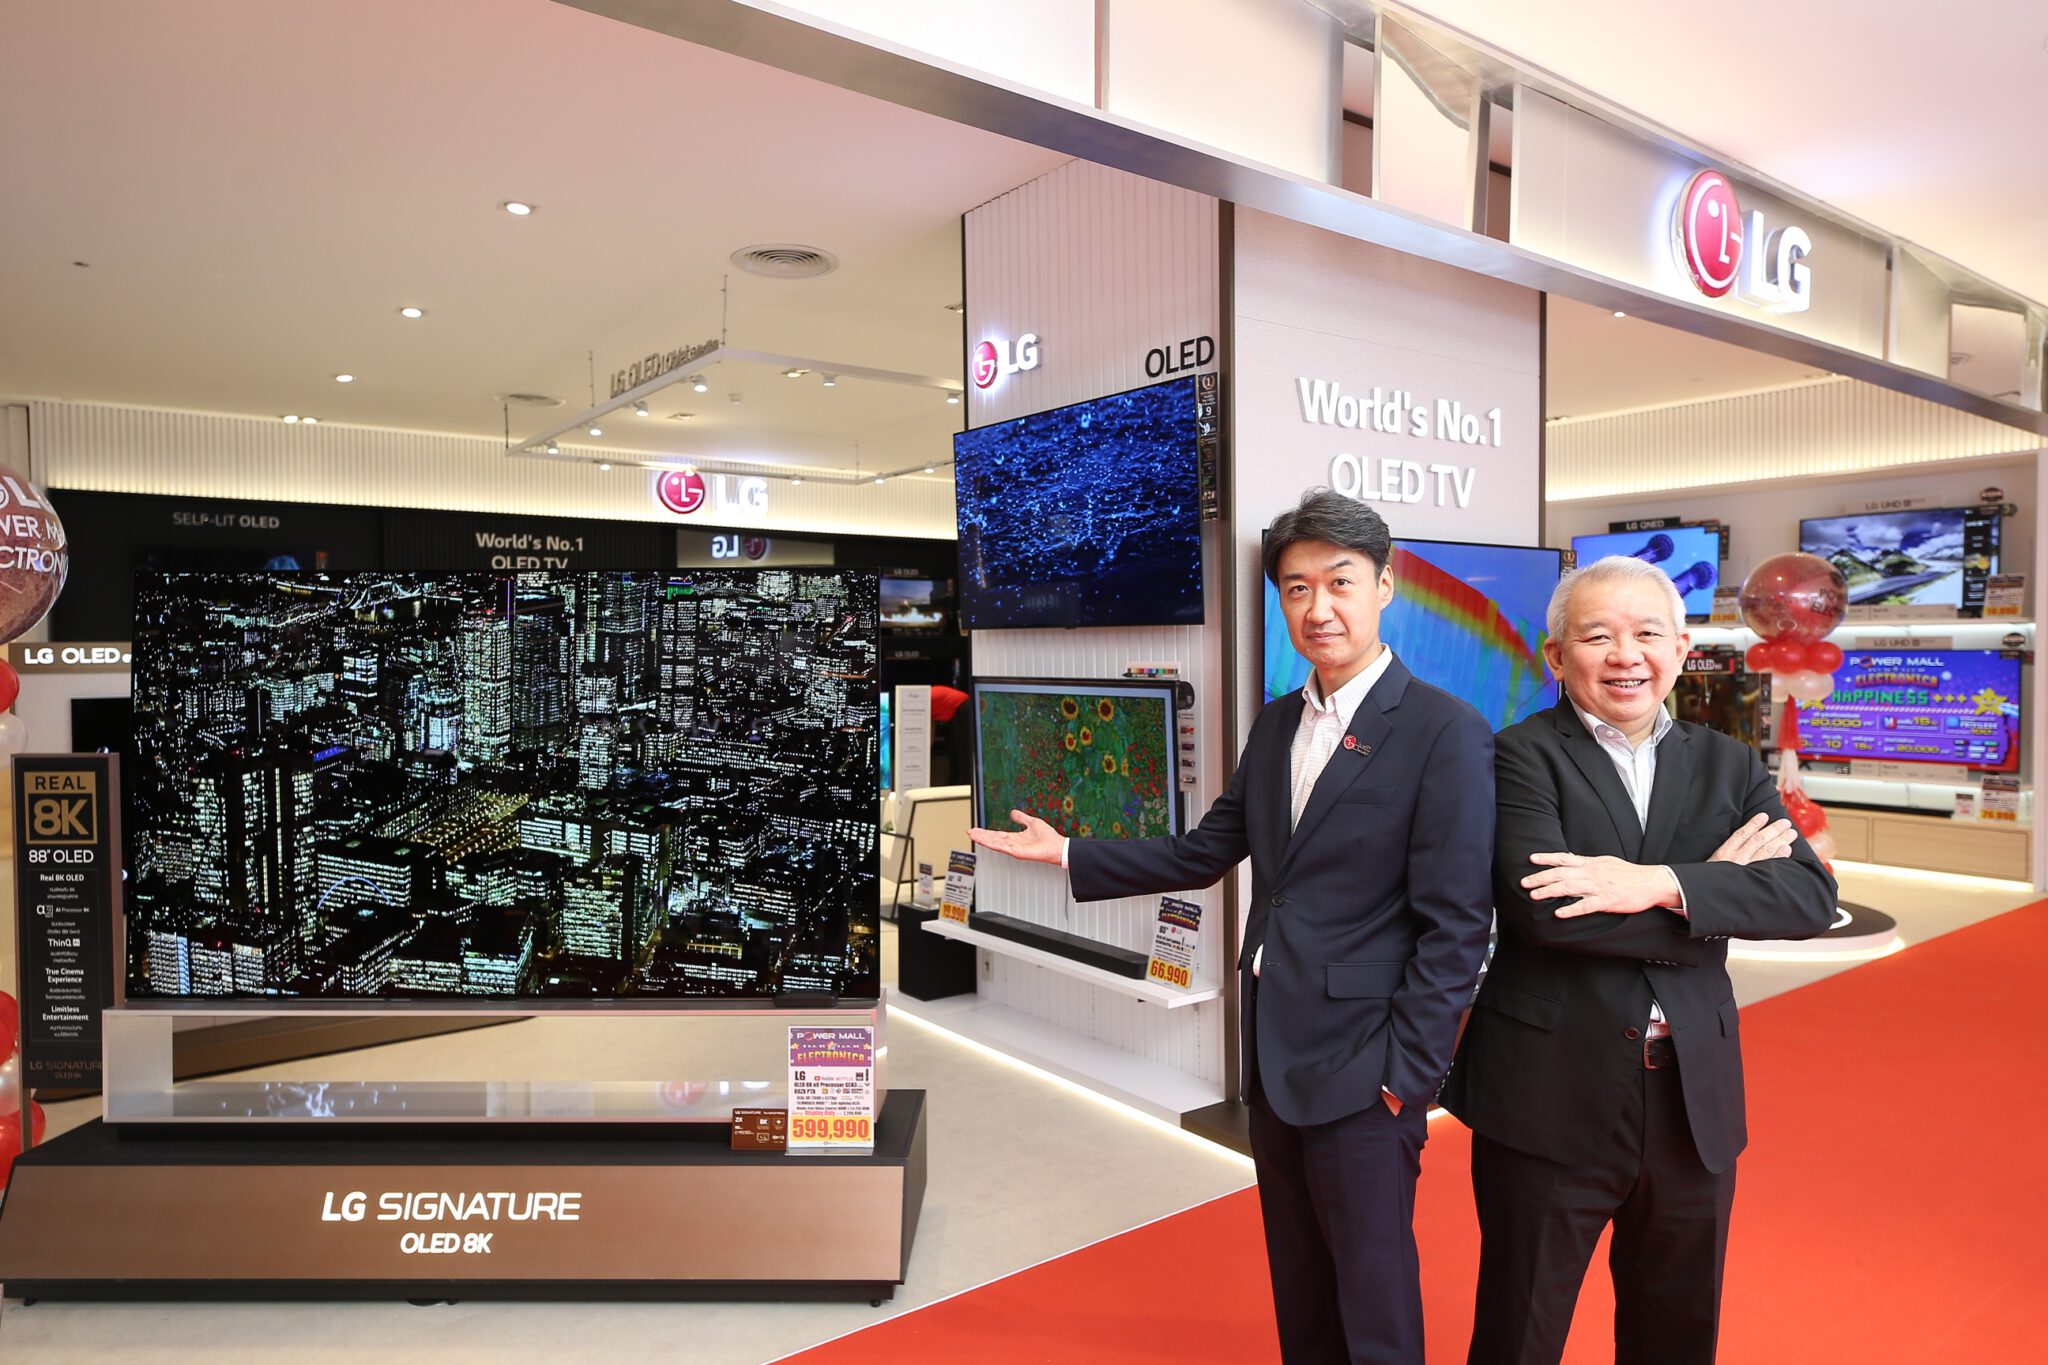 - 1. LG x Power Mall Electronica scaled - ภาพที่ 1